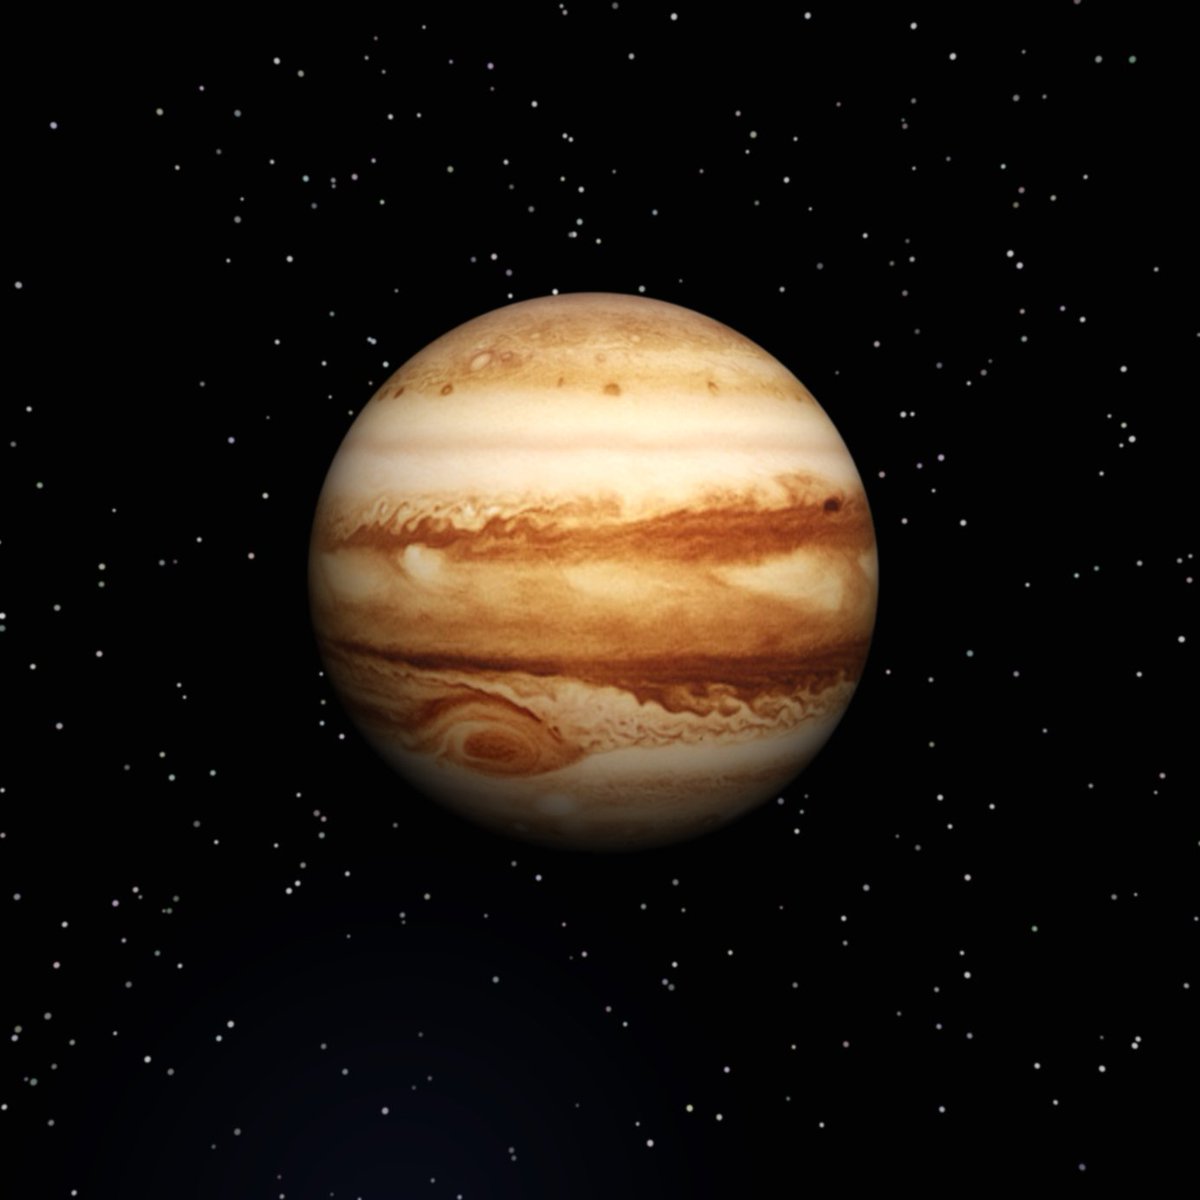 Scitech On Twitter Jupiter Has The Shortest Day Of The 8